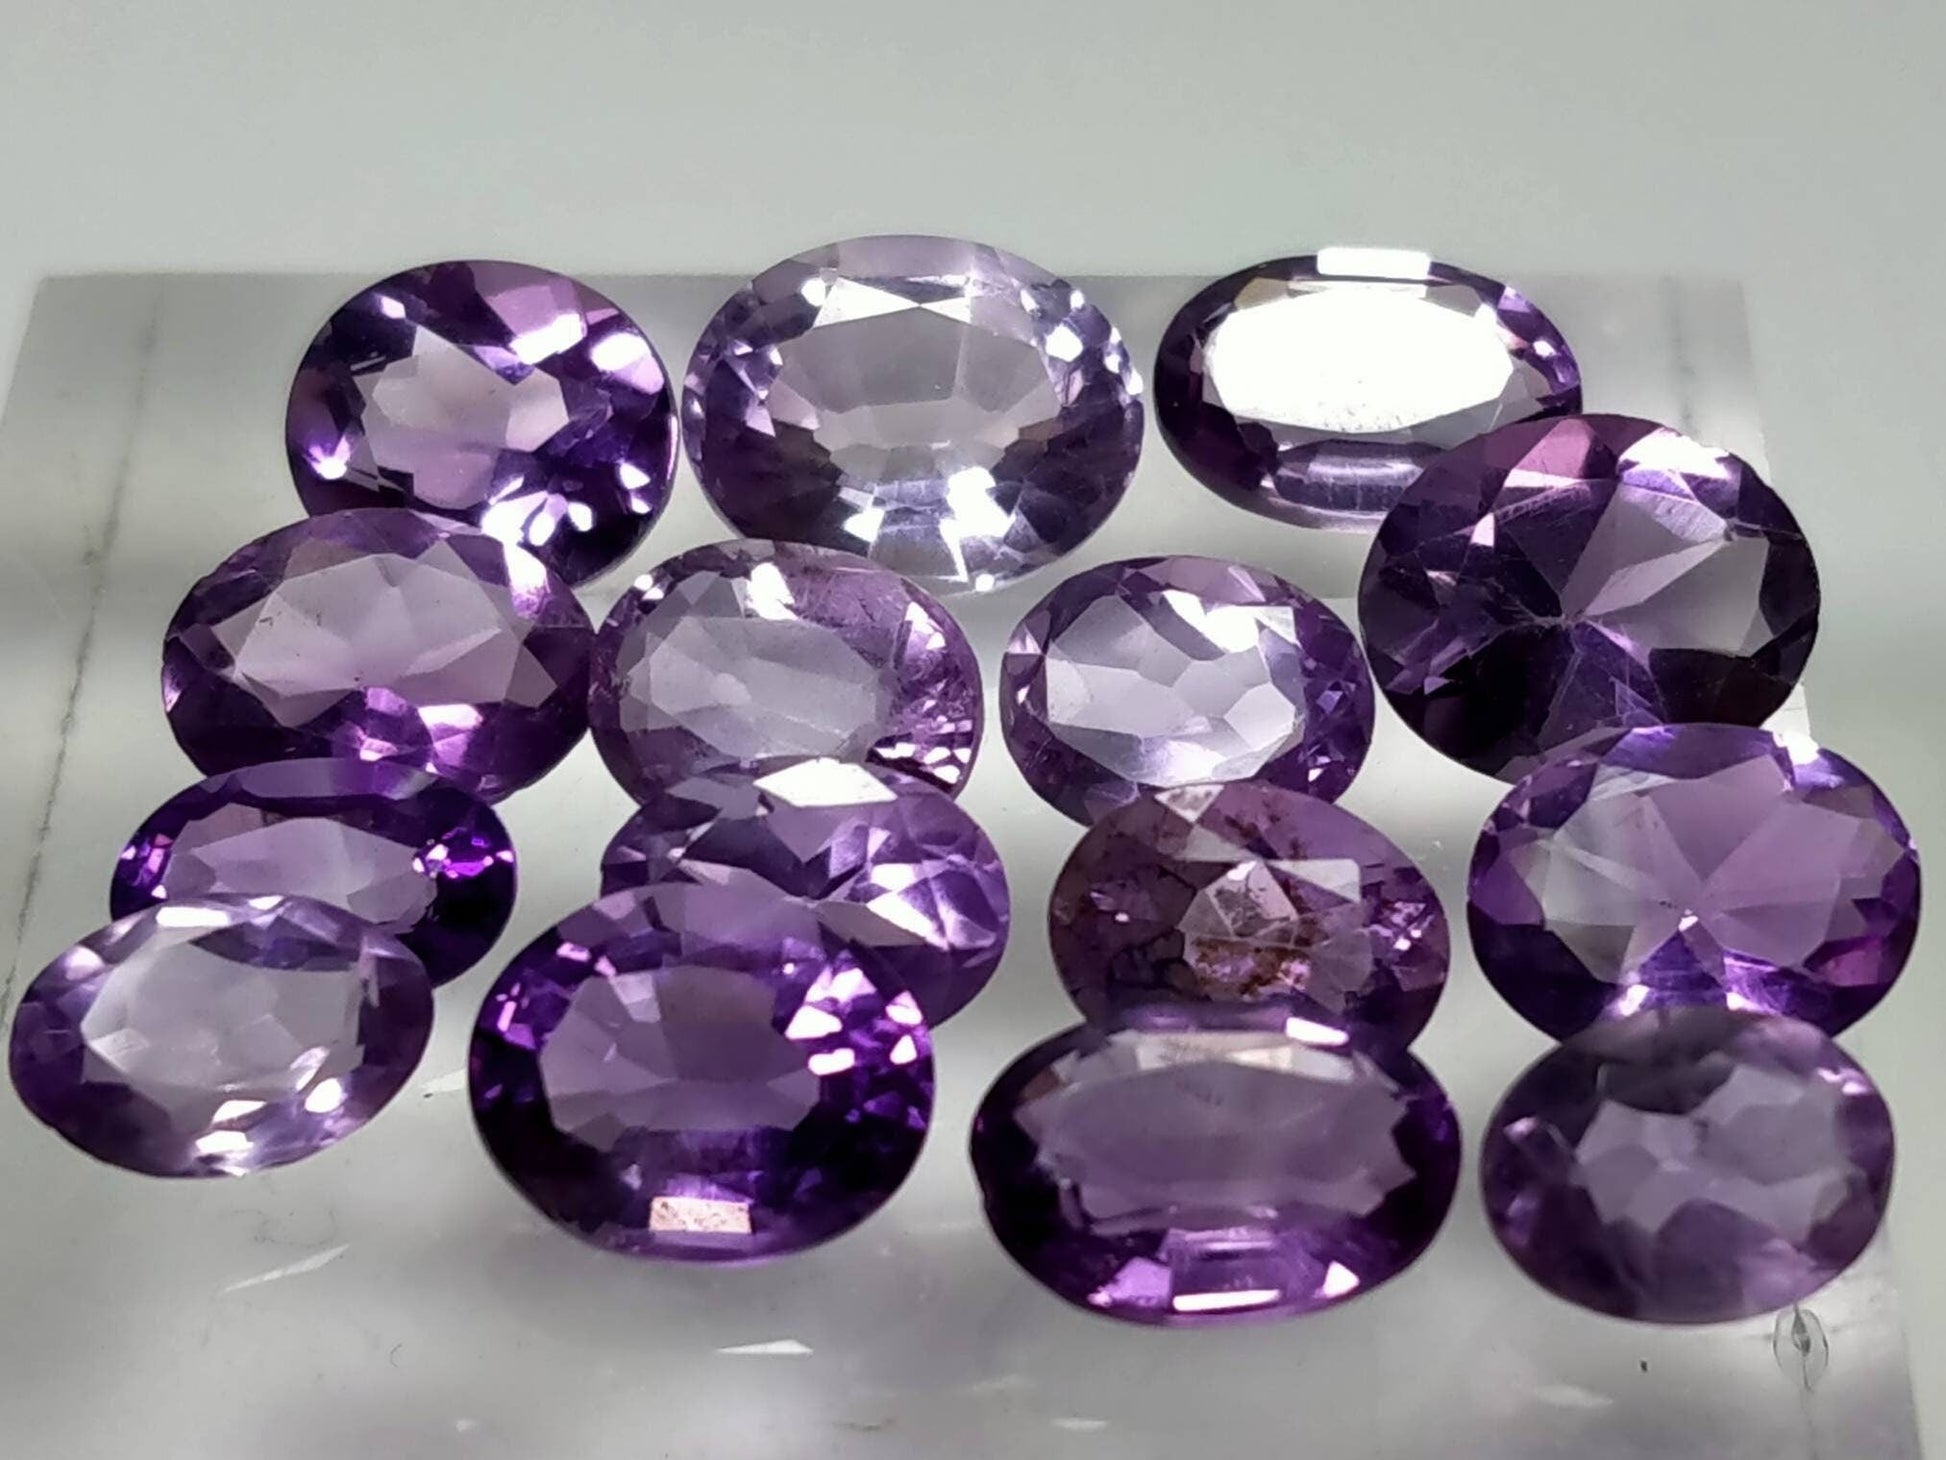 ARSAA GEMS AND MINERALSNatural top quality beautiful 22 carats Faceted calibrated amythest gems - Premium  from ARSAA GEMS AND MINERALS - Just $65.00! Shop now at ARSAA GEMS AND MINERALS